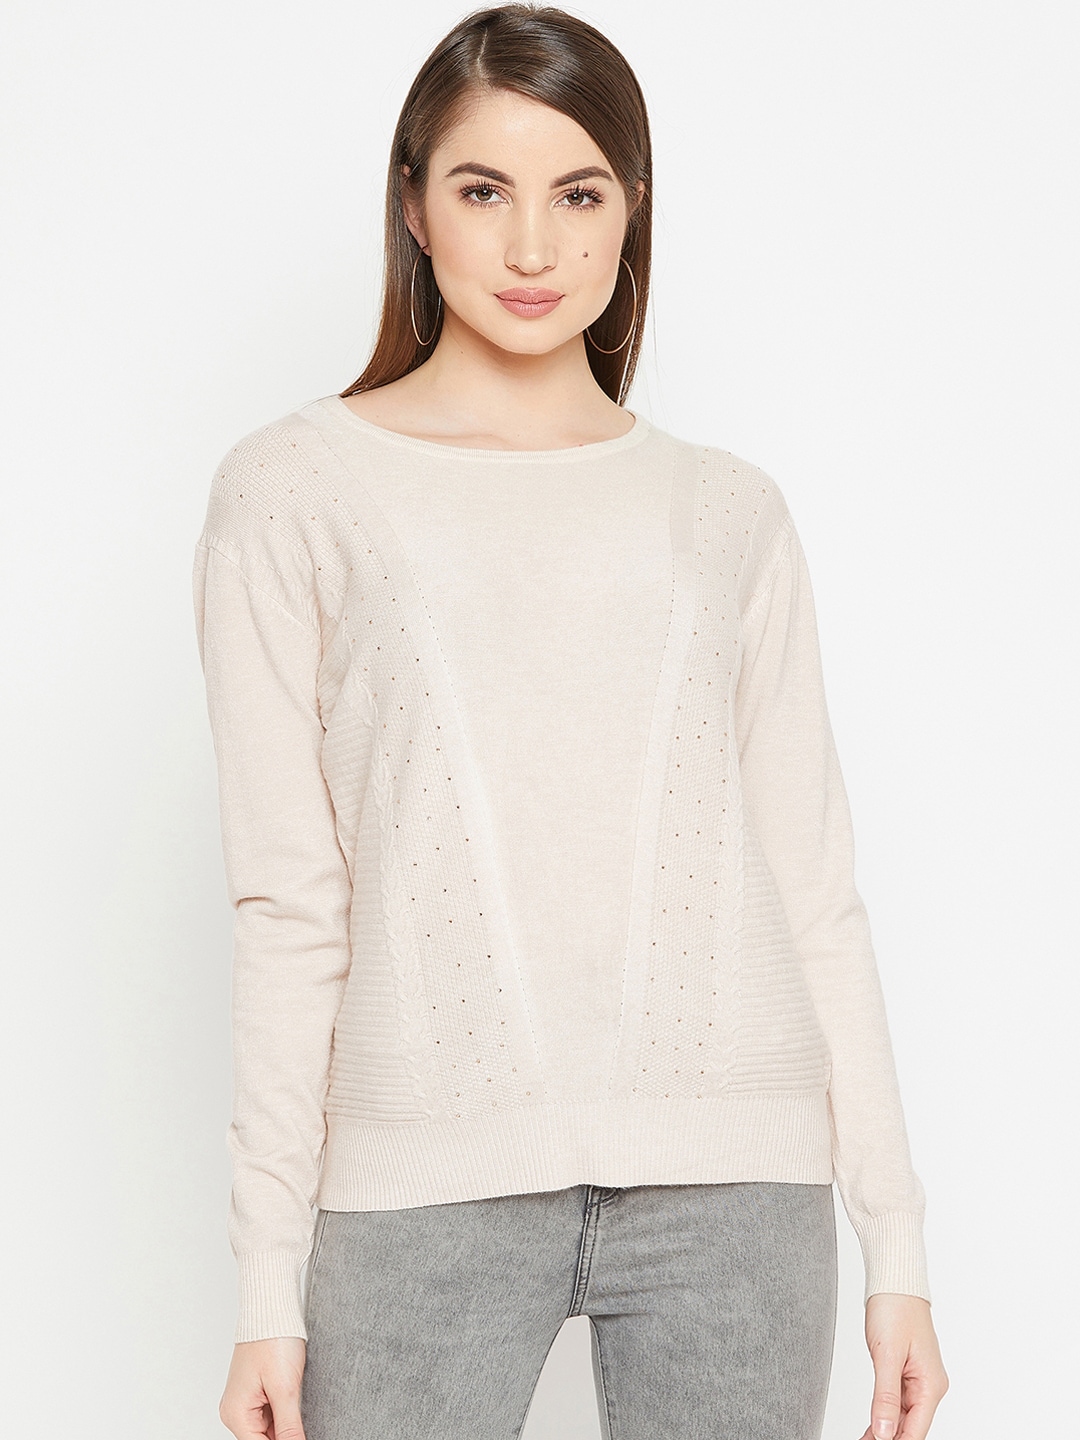 Carlton London Women Beige Solid Pullover Sweater Price in India